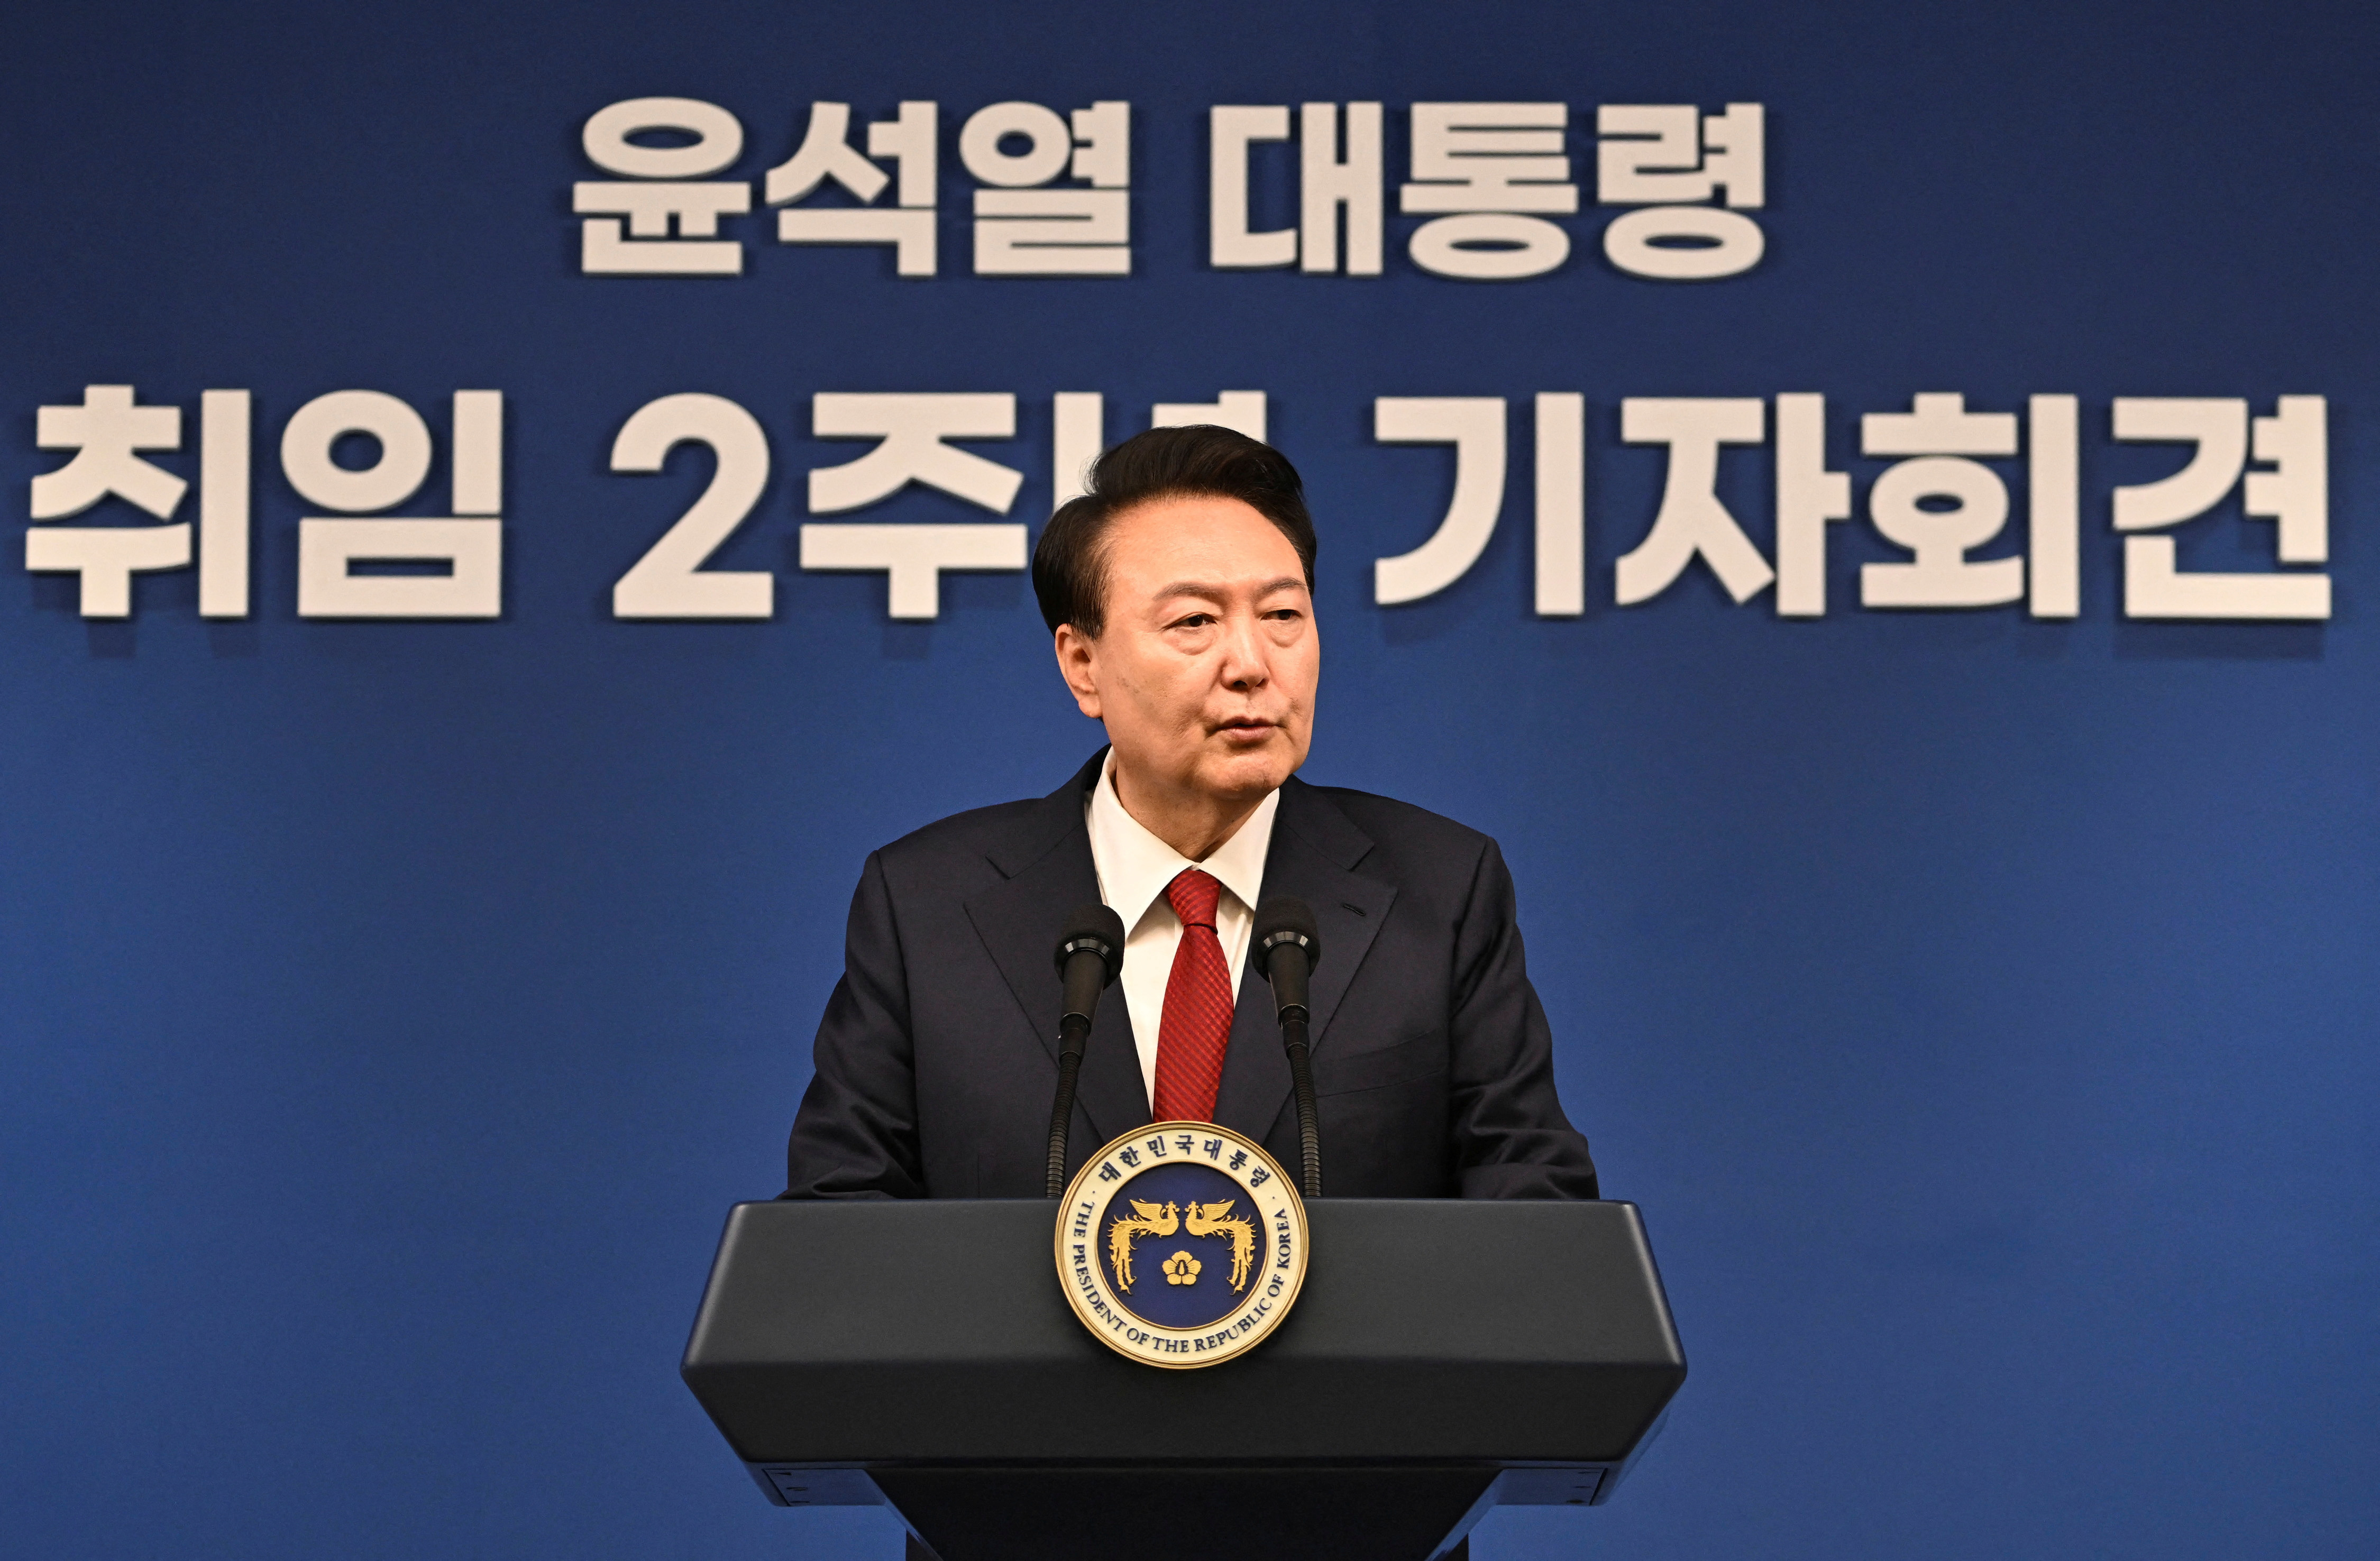 South Korean President Yoon Suk-yeol attends a press conference marking two years in office, in Seoul